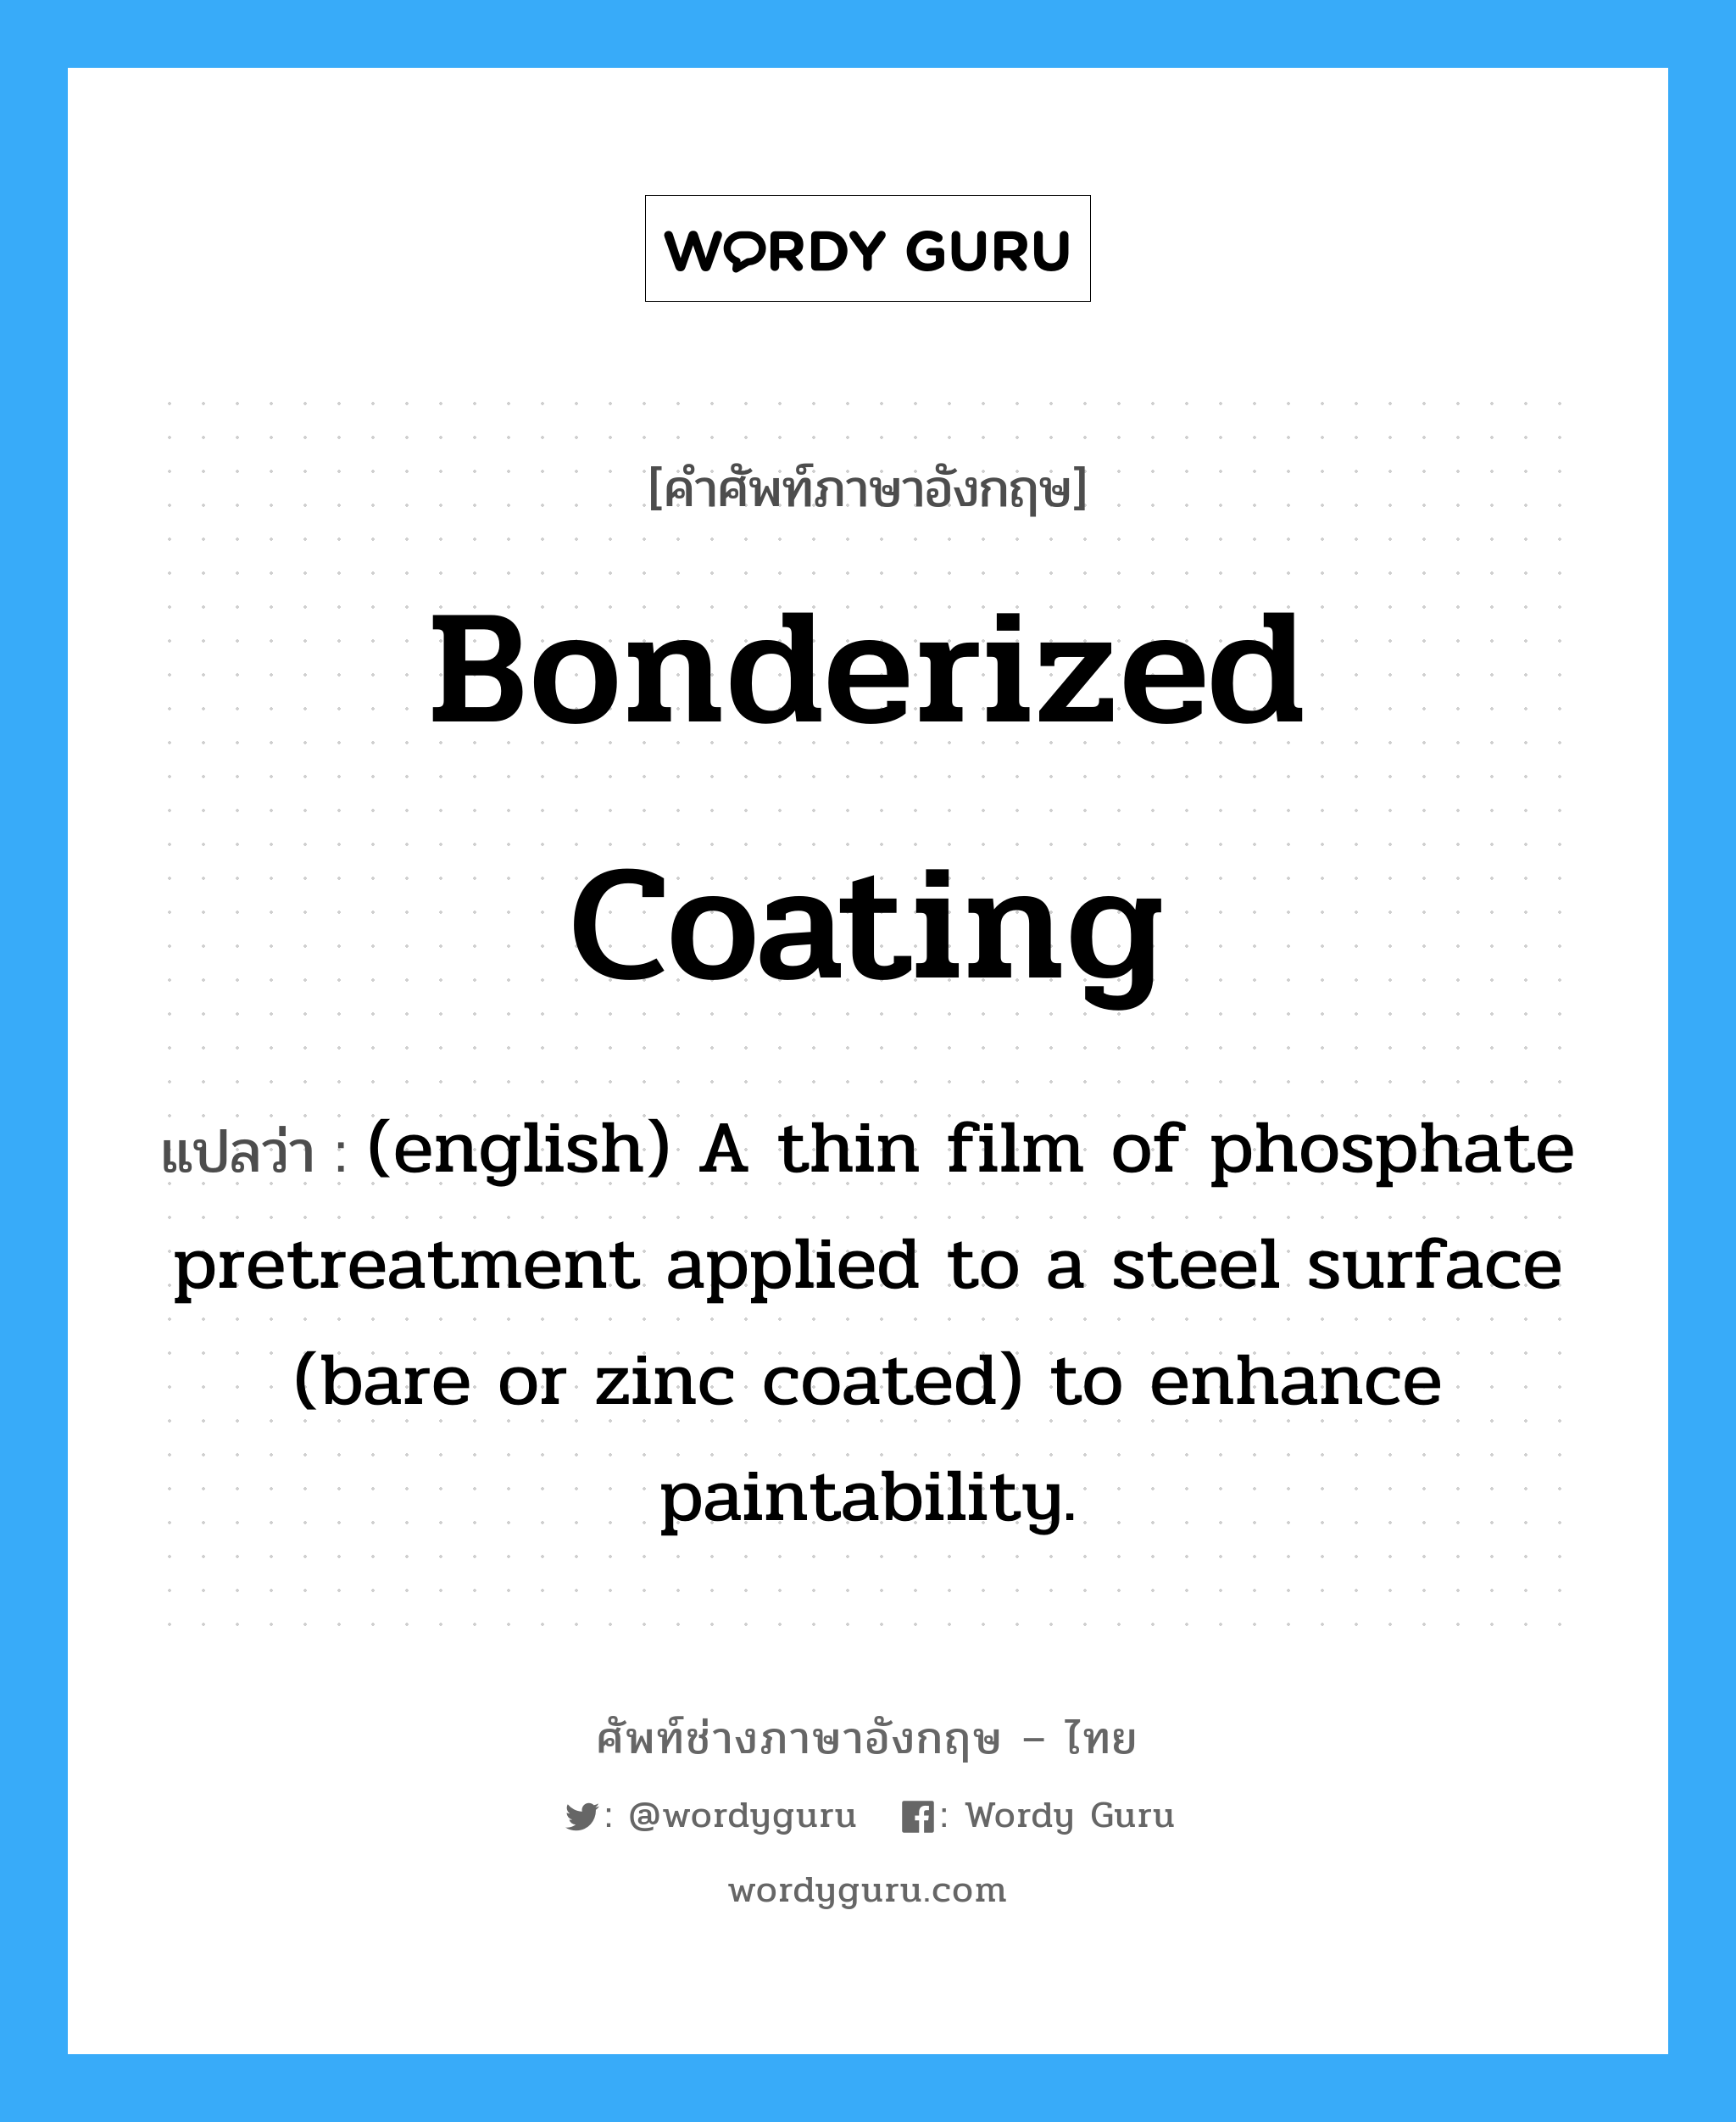 (english) A thin film of phosphate pretreatment applied to a steel surface (bare or zinc coated) to enhance paintability. ภาษาอังกฤษ?, คำศัพท์ช่างภาษาอังกฤษ - ไทย (english) A thin film of phosphate pretreatment applied to a steel surface (bare or zinc coated) to enhance paintability. คำศัพท์ภาษาอังกฤษ (english) A thin film of phosphate pretreatment applied to a steel surface (bare or zinc coated) to enhance paintability. แปลว่า Bonderized Coating